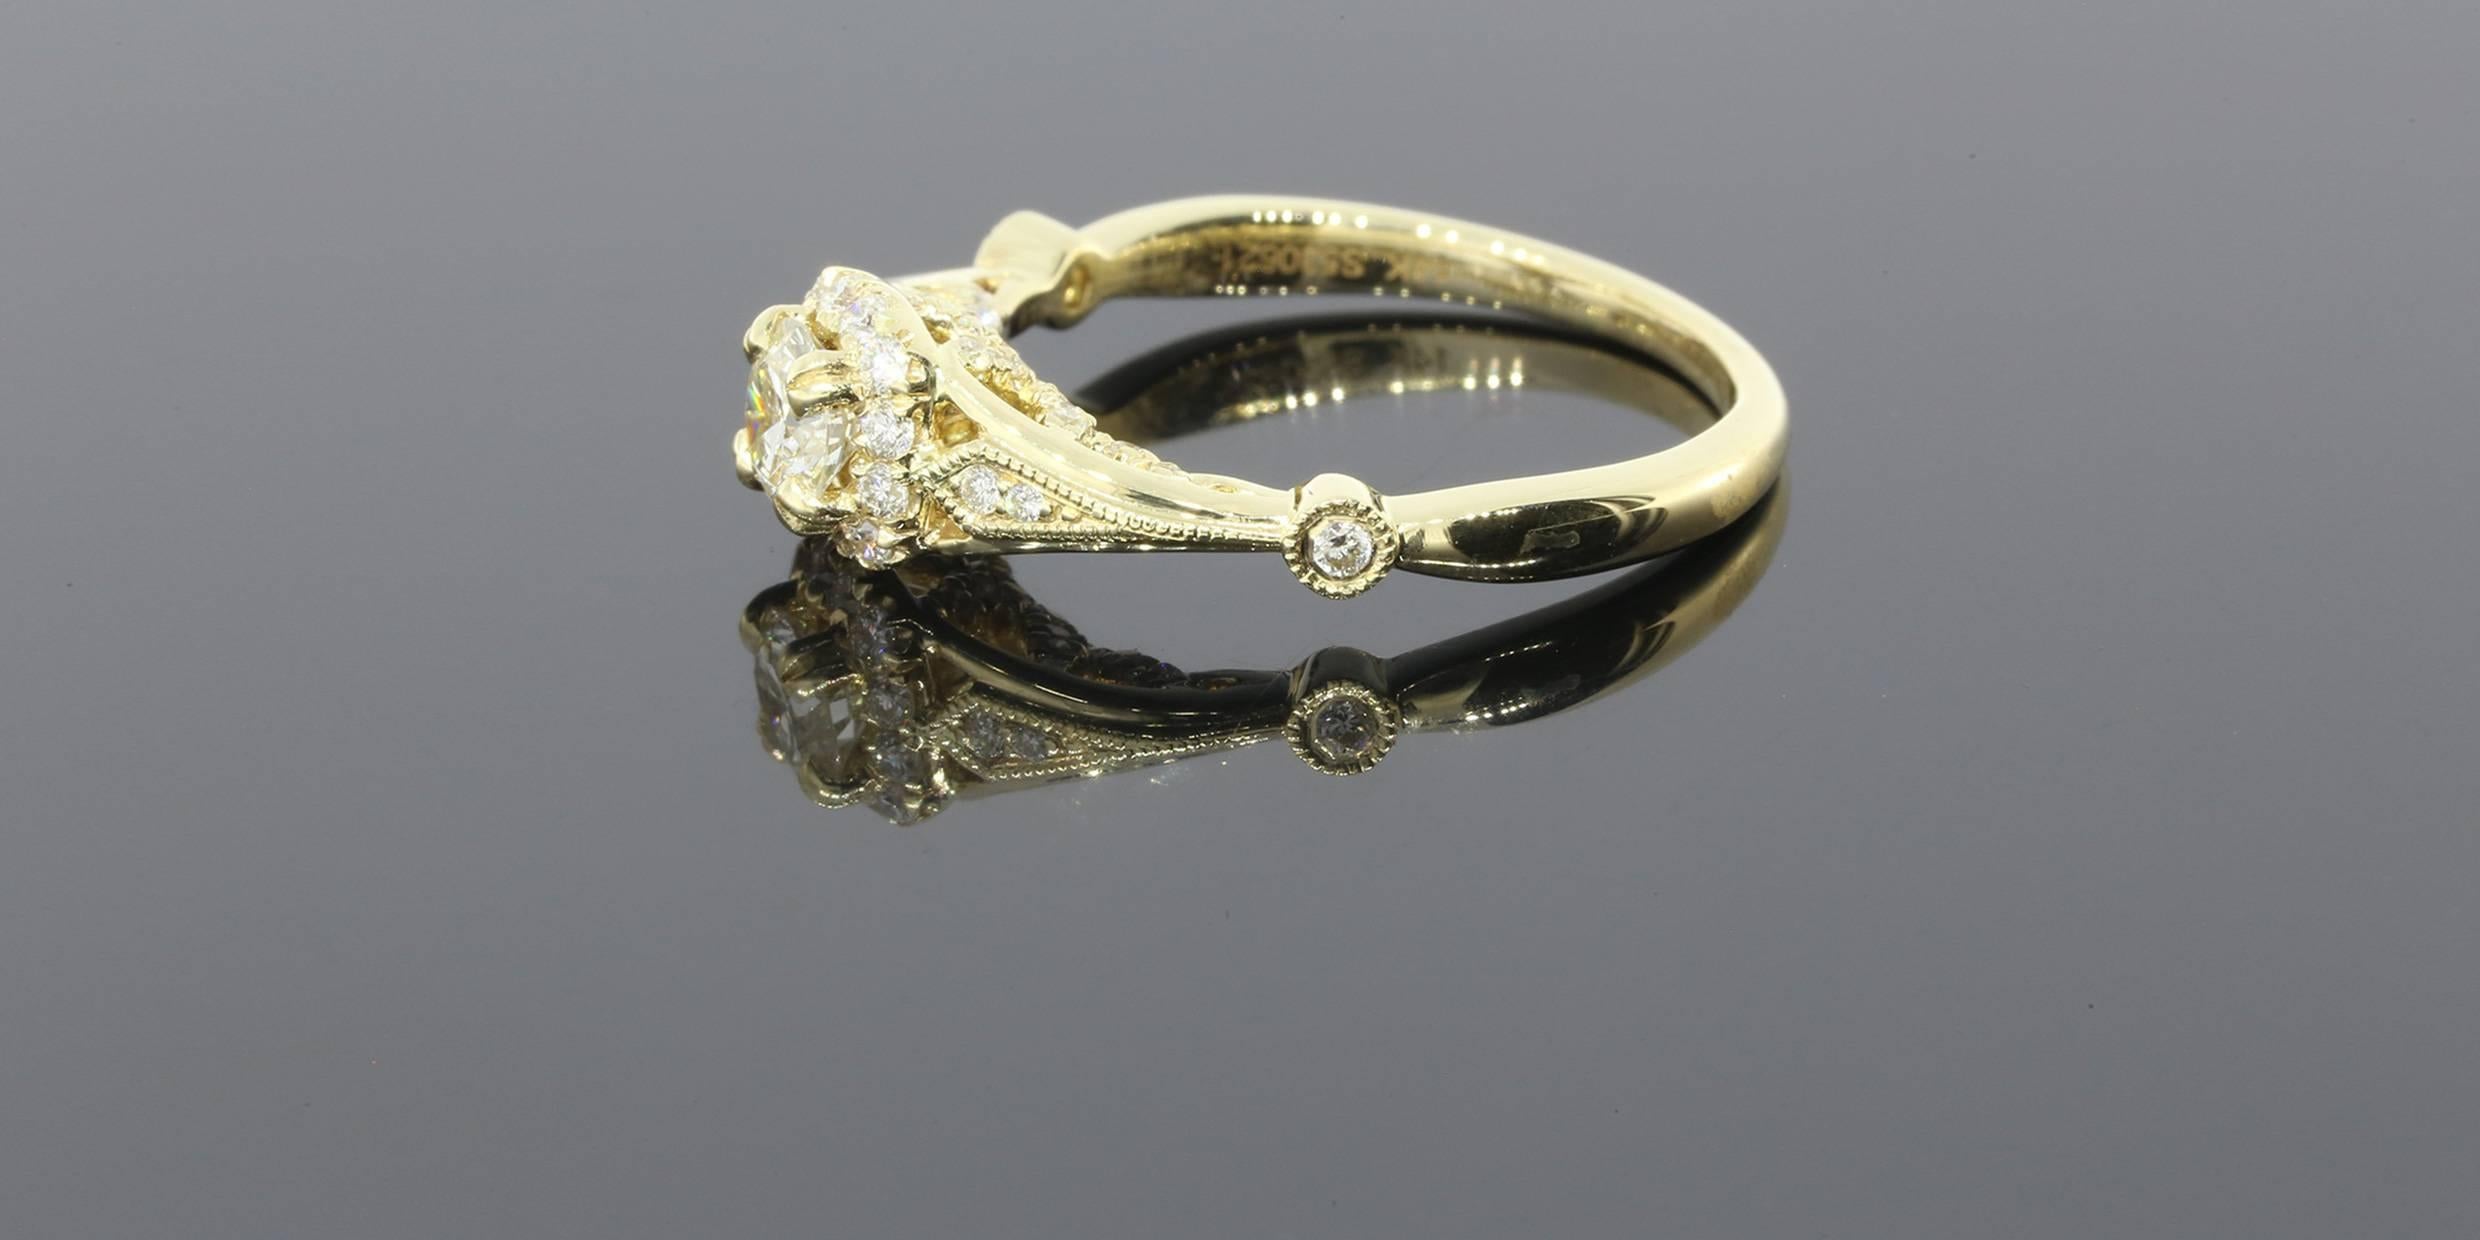 This beautiful yellow gold engagement ring has lovely, intricate, vintage inspired details all over. The center diamond is a .36 carat round brilliant cut that is J/SI1 in quality. It is split prong set & surrounded by a halo of prong set